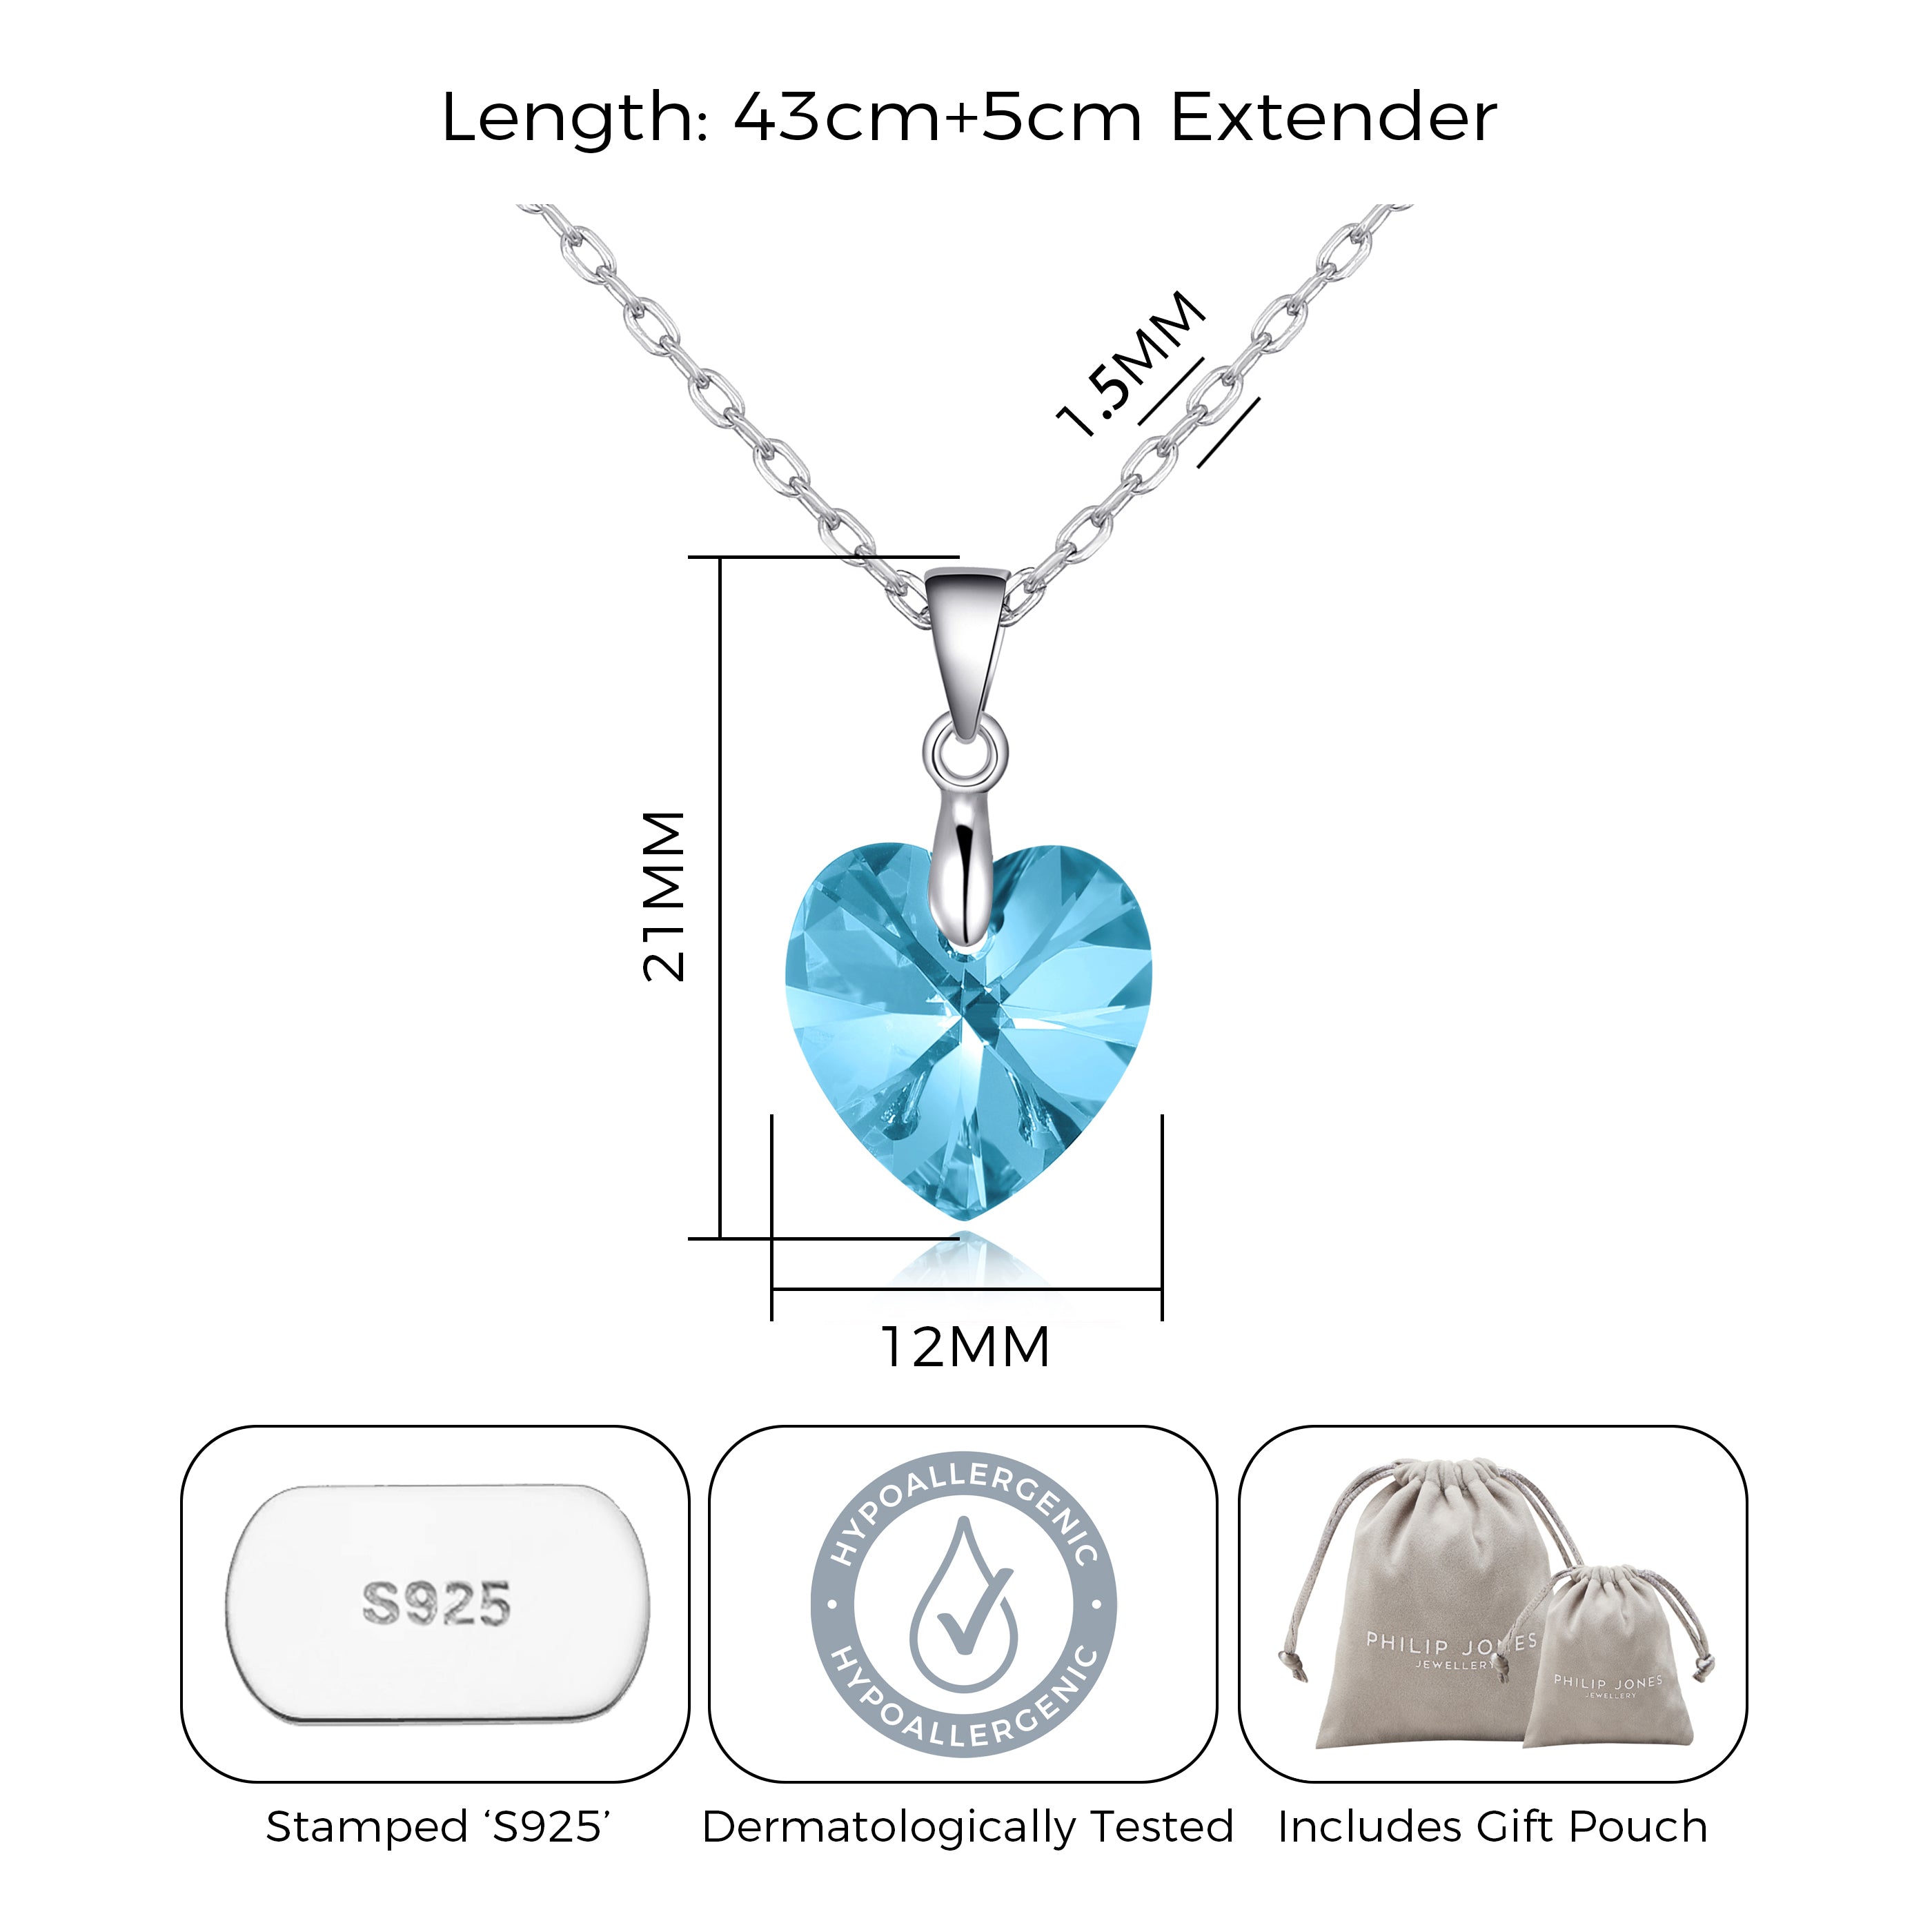 Sterling Silver Aquamarine Heart Necklace Created with Zircondia® Crystals